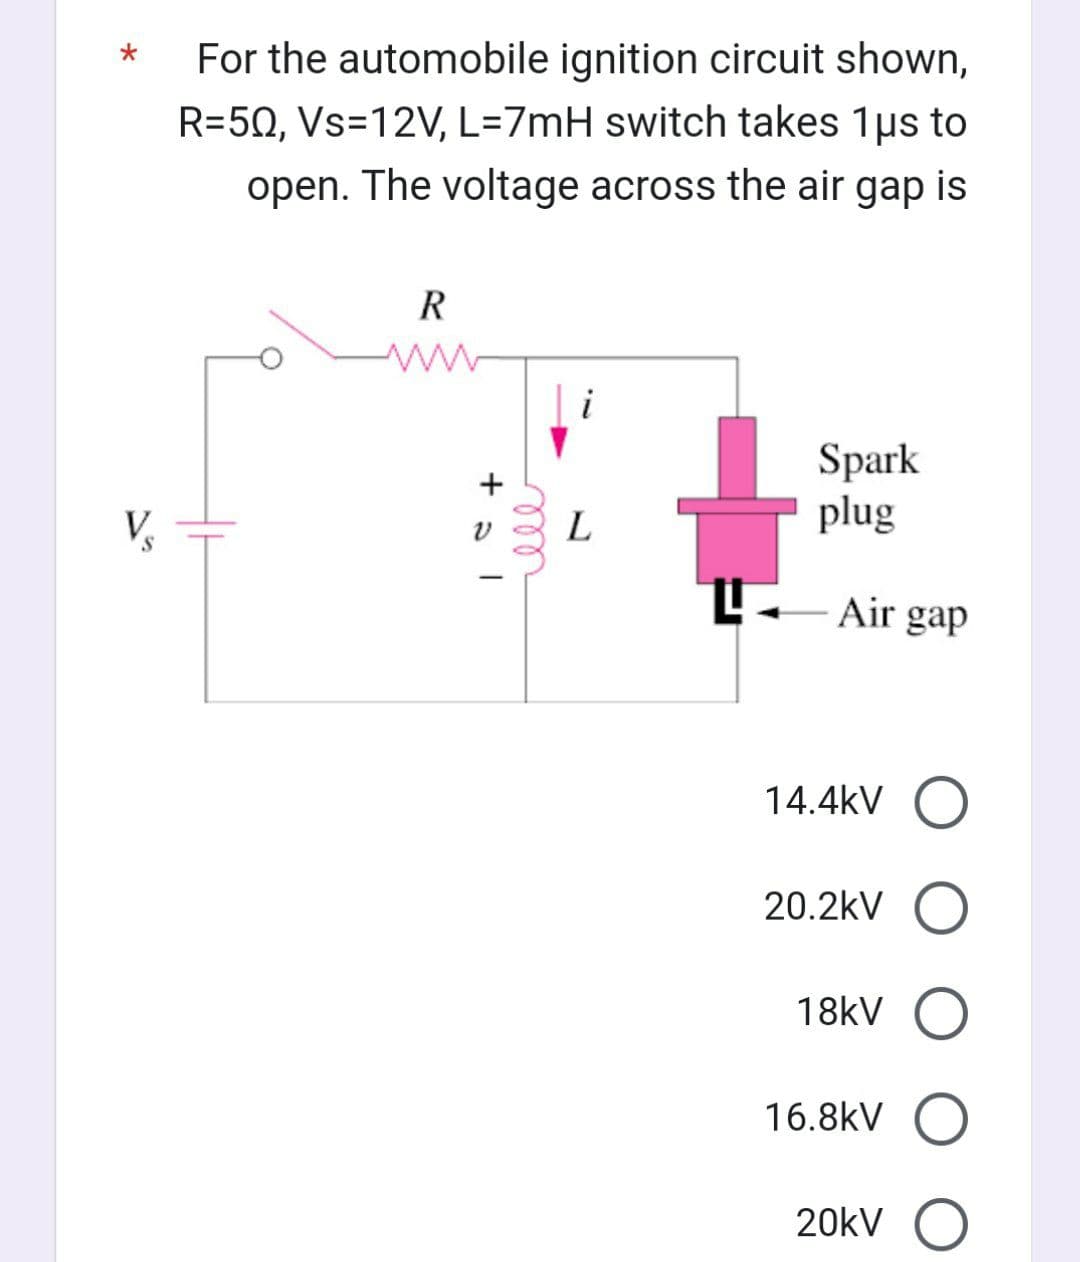 S
For the automobile ignition circuit shown,
R=50, Vs=12V, L=7mH switch takes 1μs to
open. The voltage across the air gap is
R
+al
ell
L
Spark
plug
Air gap
14.4kV O
20.2kV O
18kV O
16.8kV O
20kV